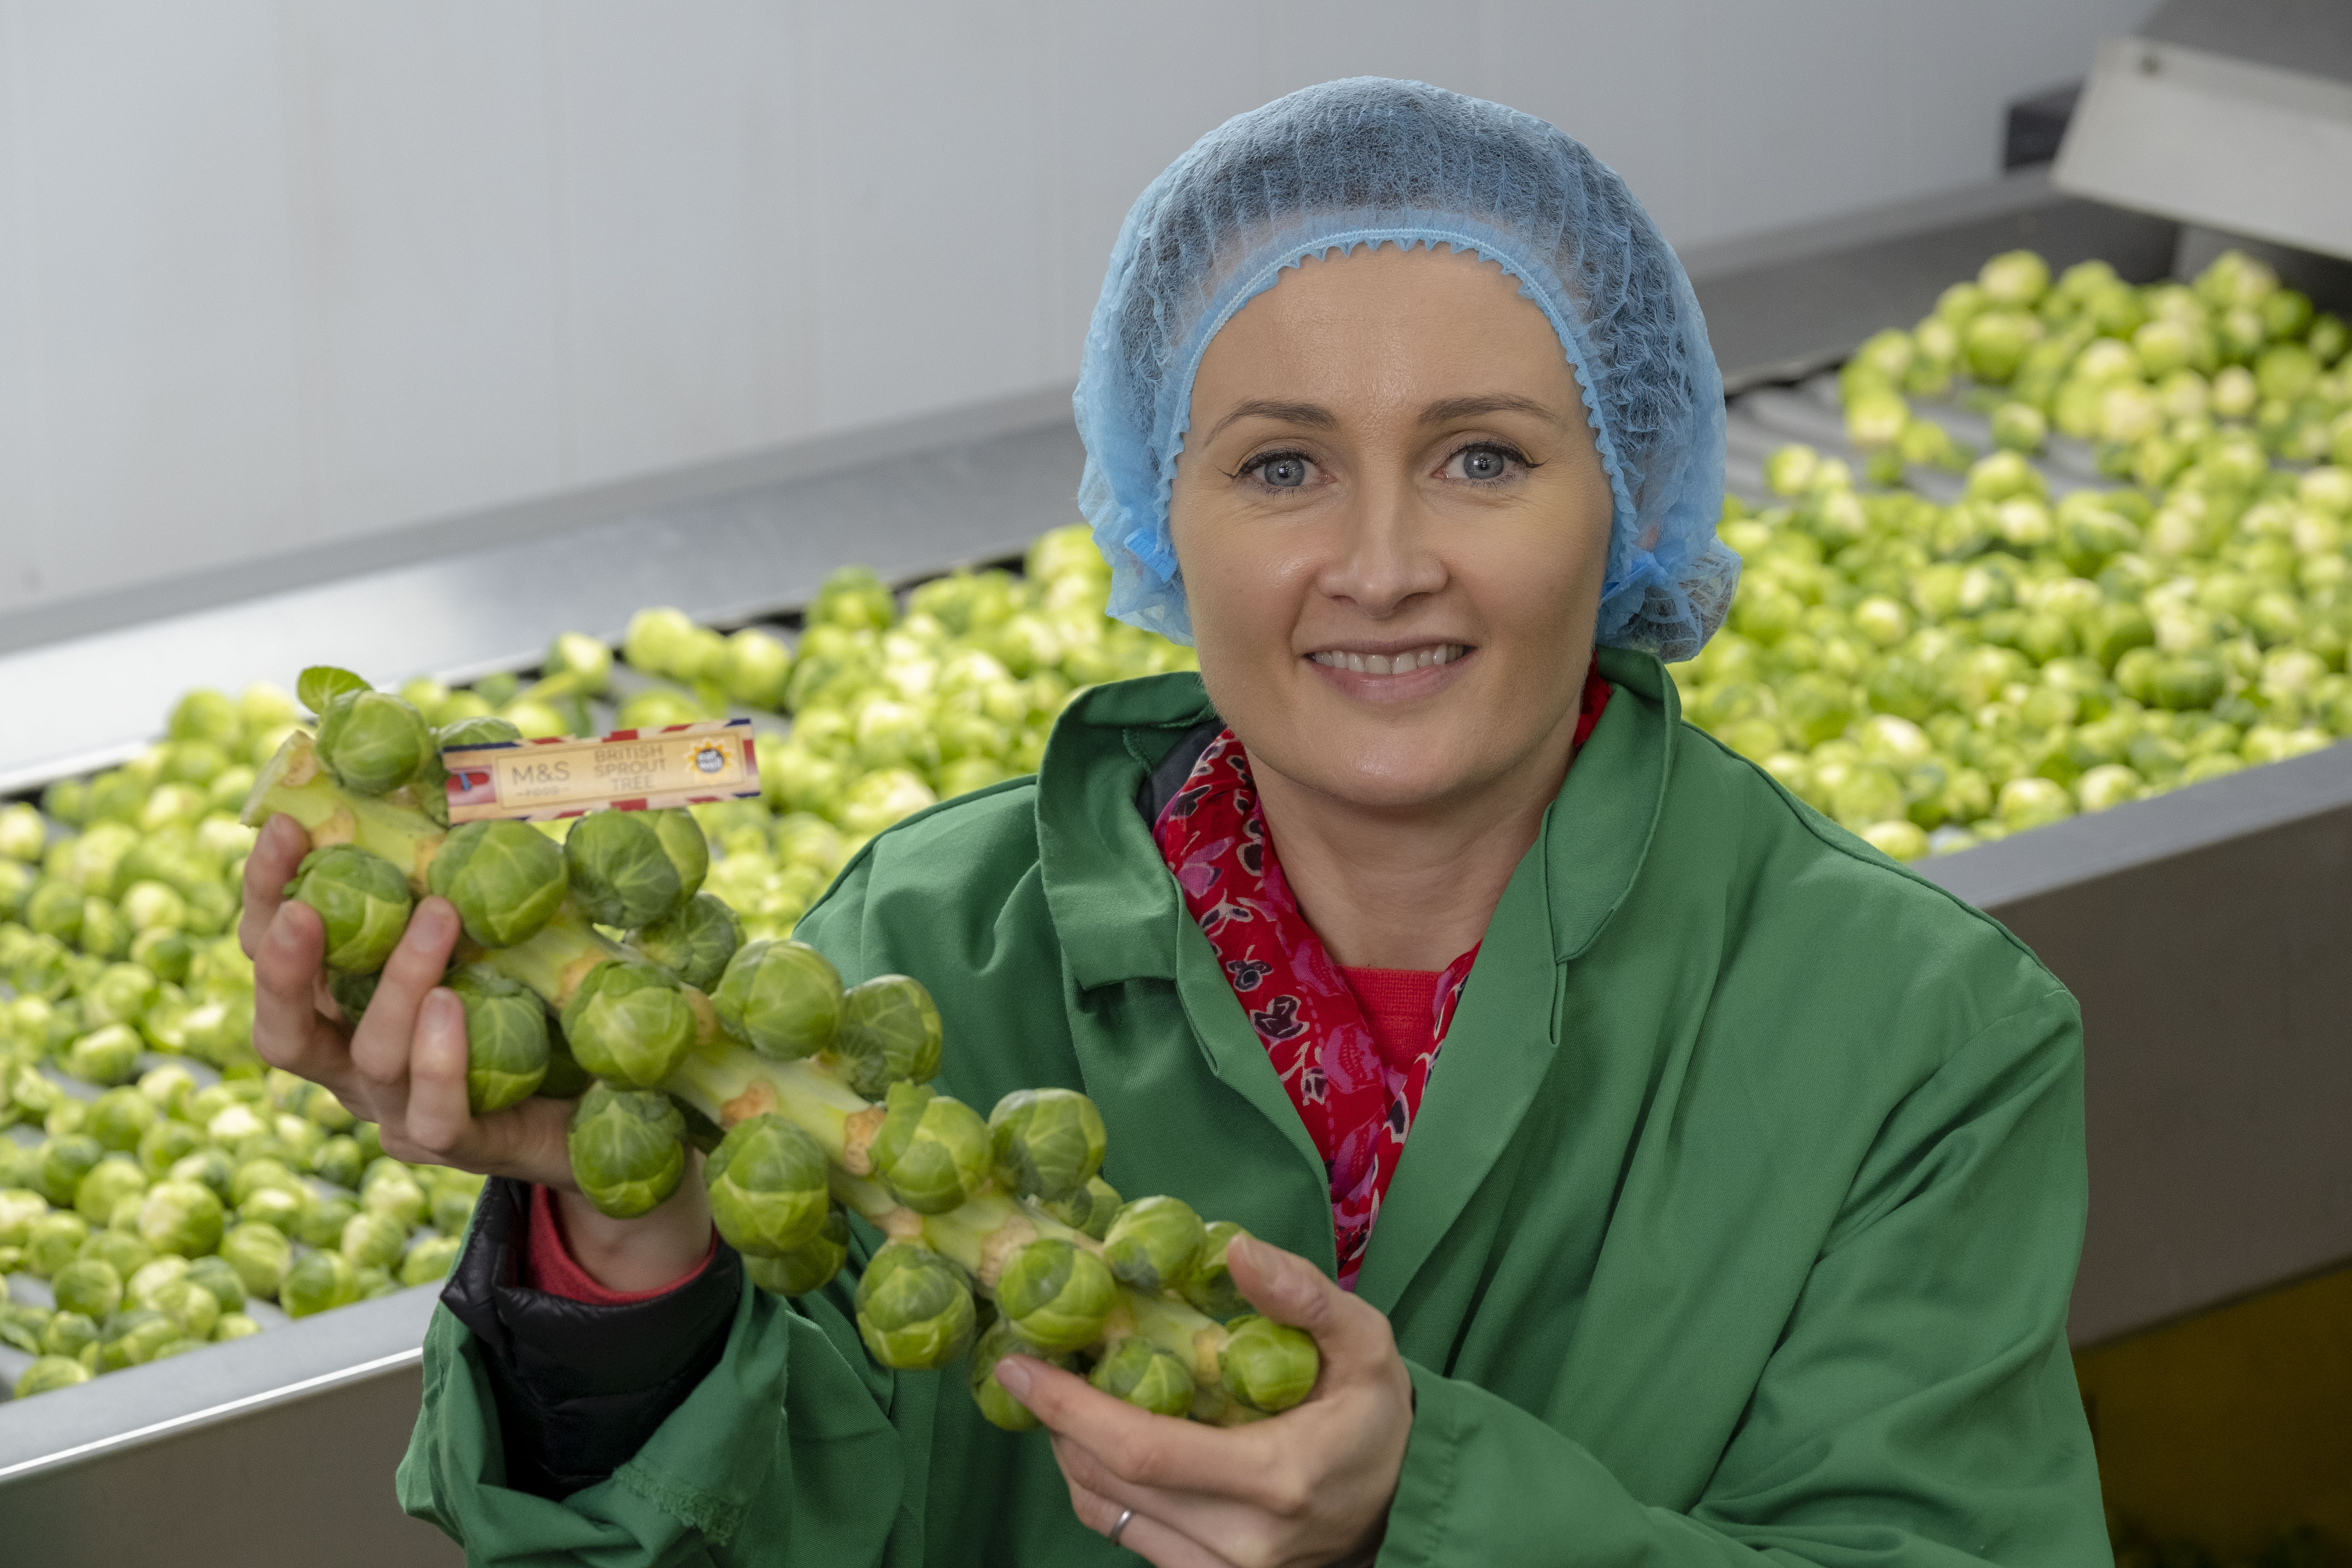 Peter Stirling's wife, Wendy, with some of the sprouts heading to M & S.